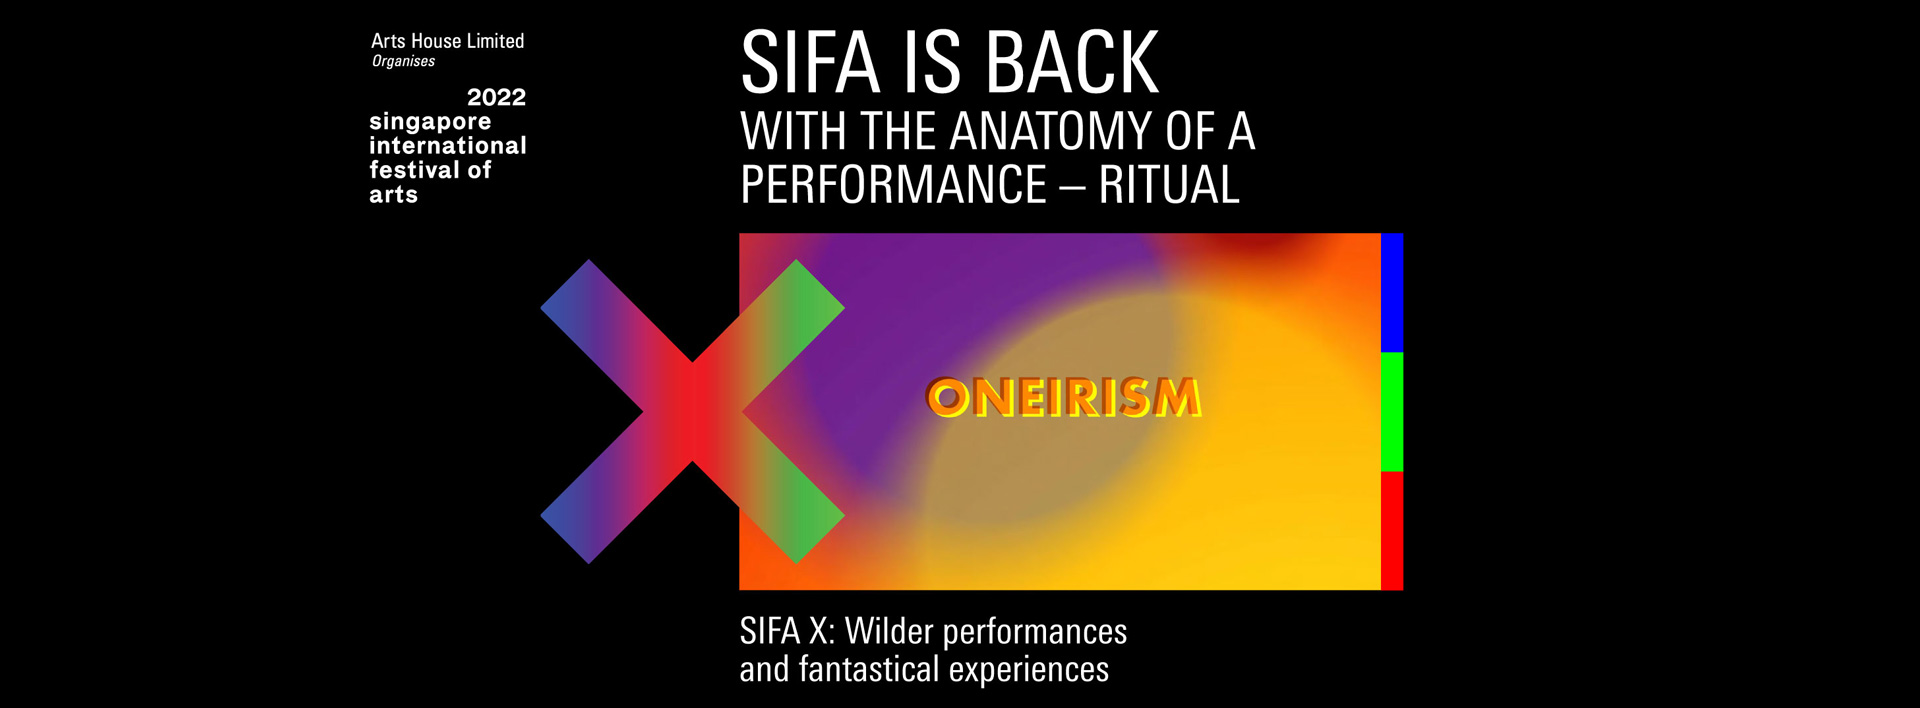 SIFA IS BACK!